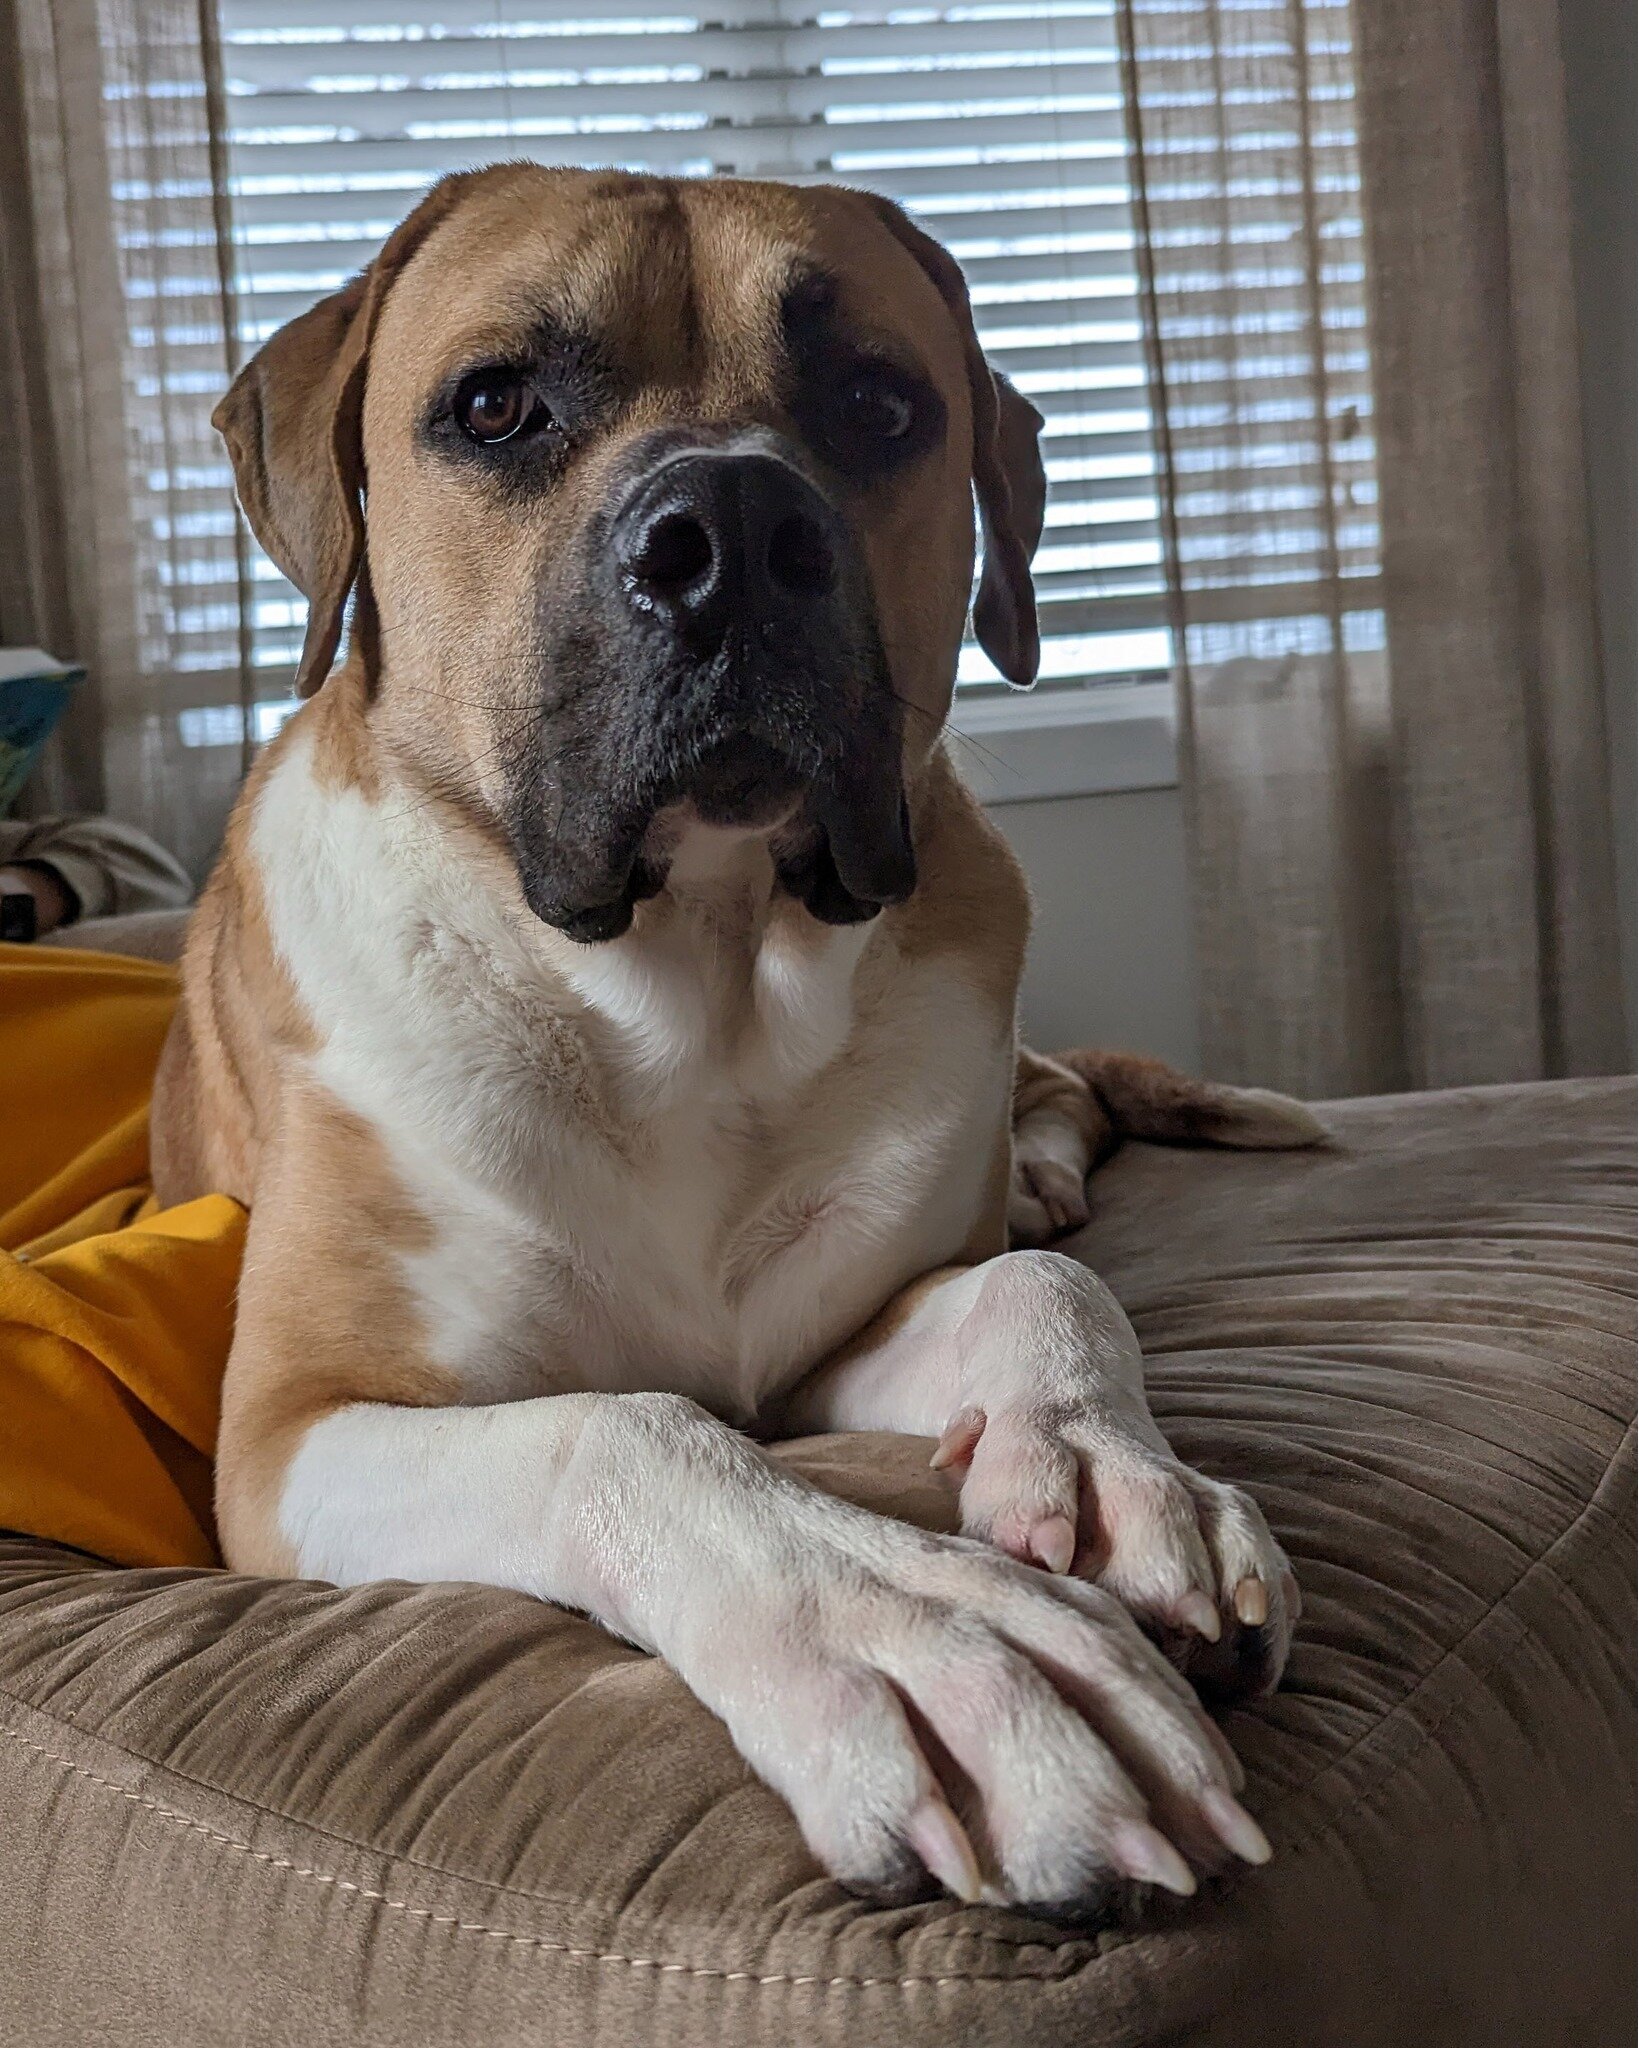 ==== ADOPTABLE Update ==== 
Update from Max's foster home.

Max is the absolute BEST BOY! Potty trained/house broken and he loves to snuggle, to play, and he thinks he&rsquo;s a lap dog. At only a little over year old, he&rsquo;s still learning to no